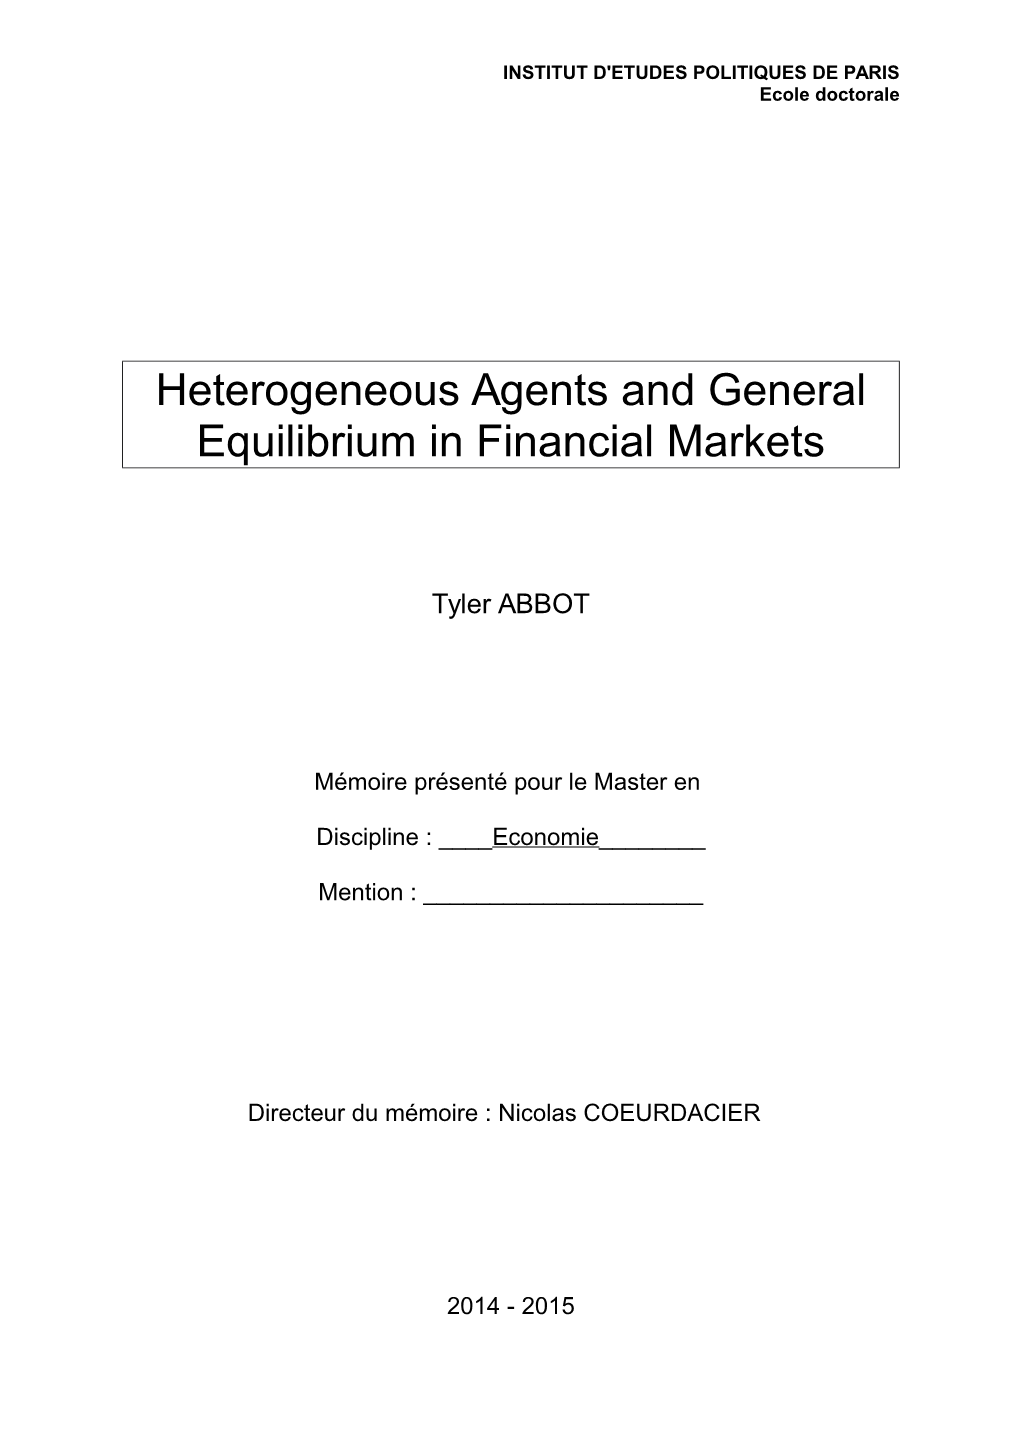 Heterogeneous Agents and General Equilibrium in Financial Markets